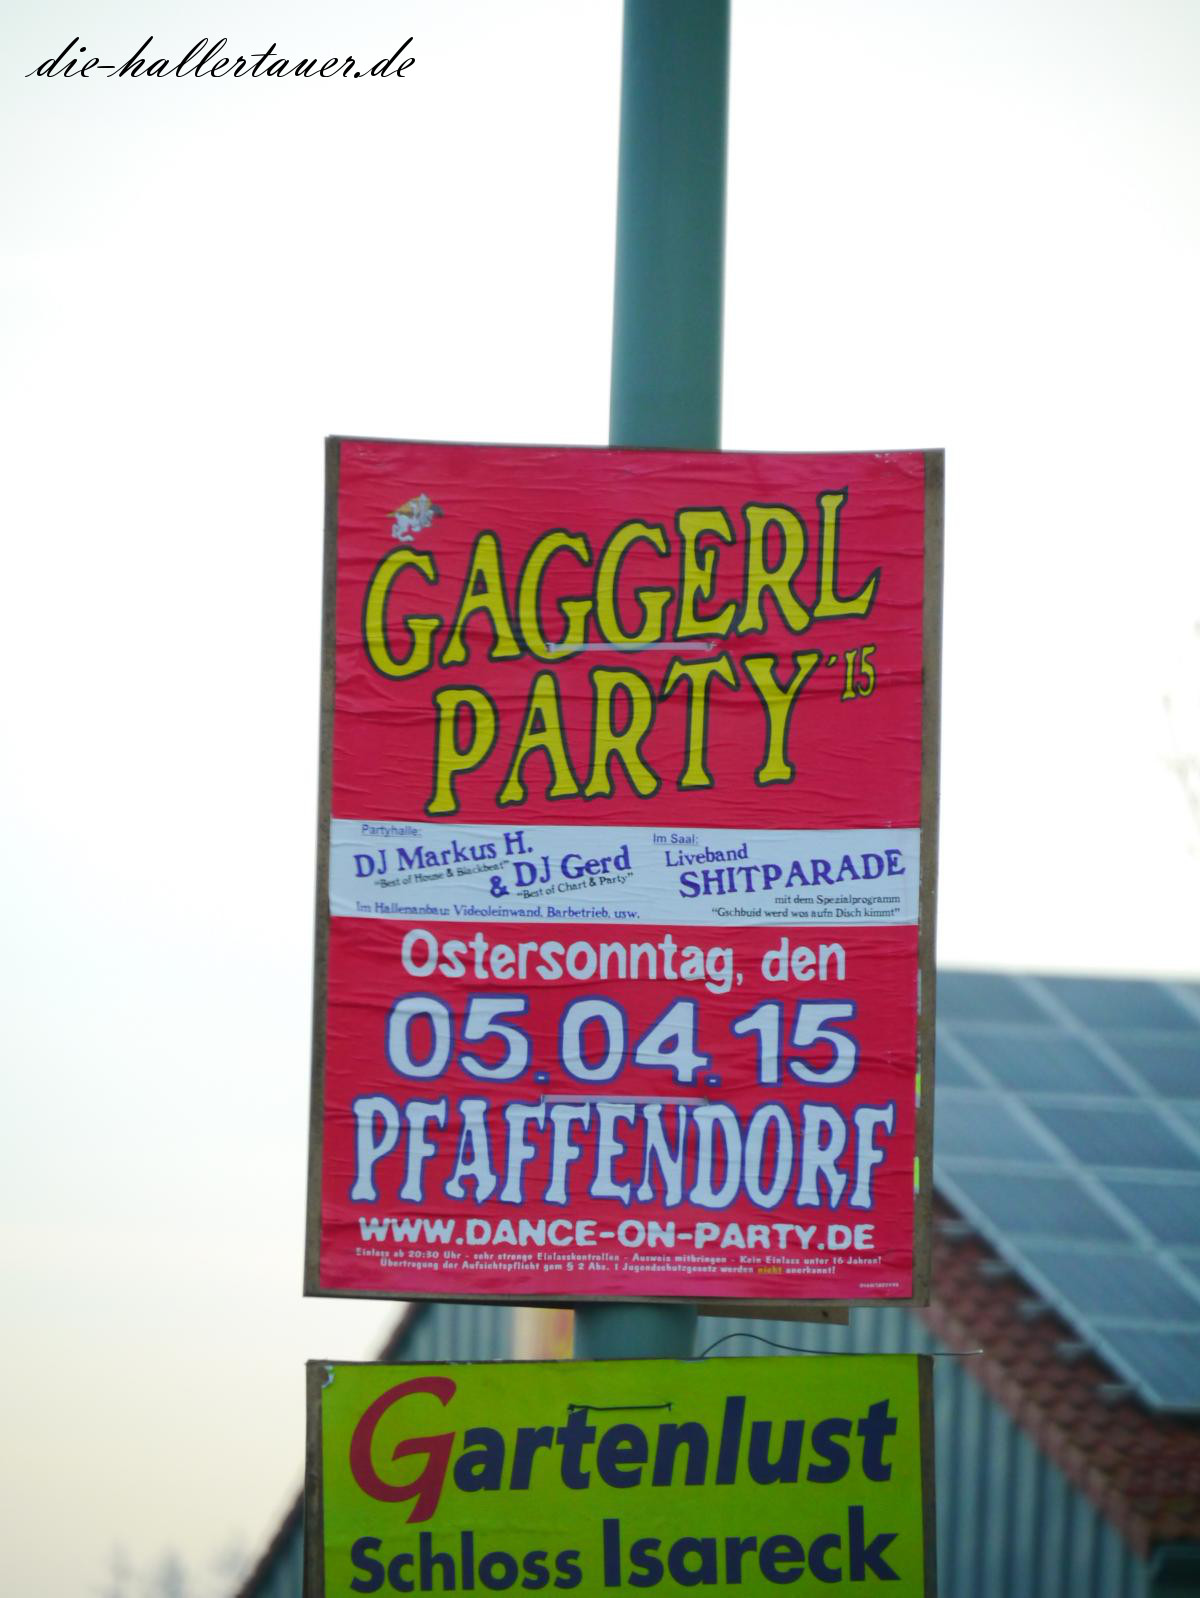 Gaggerl Party